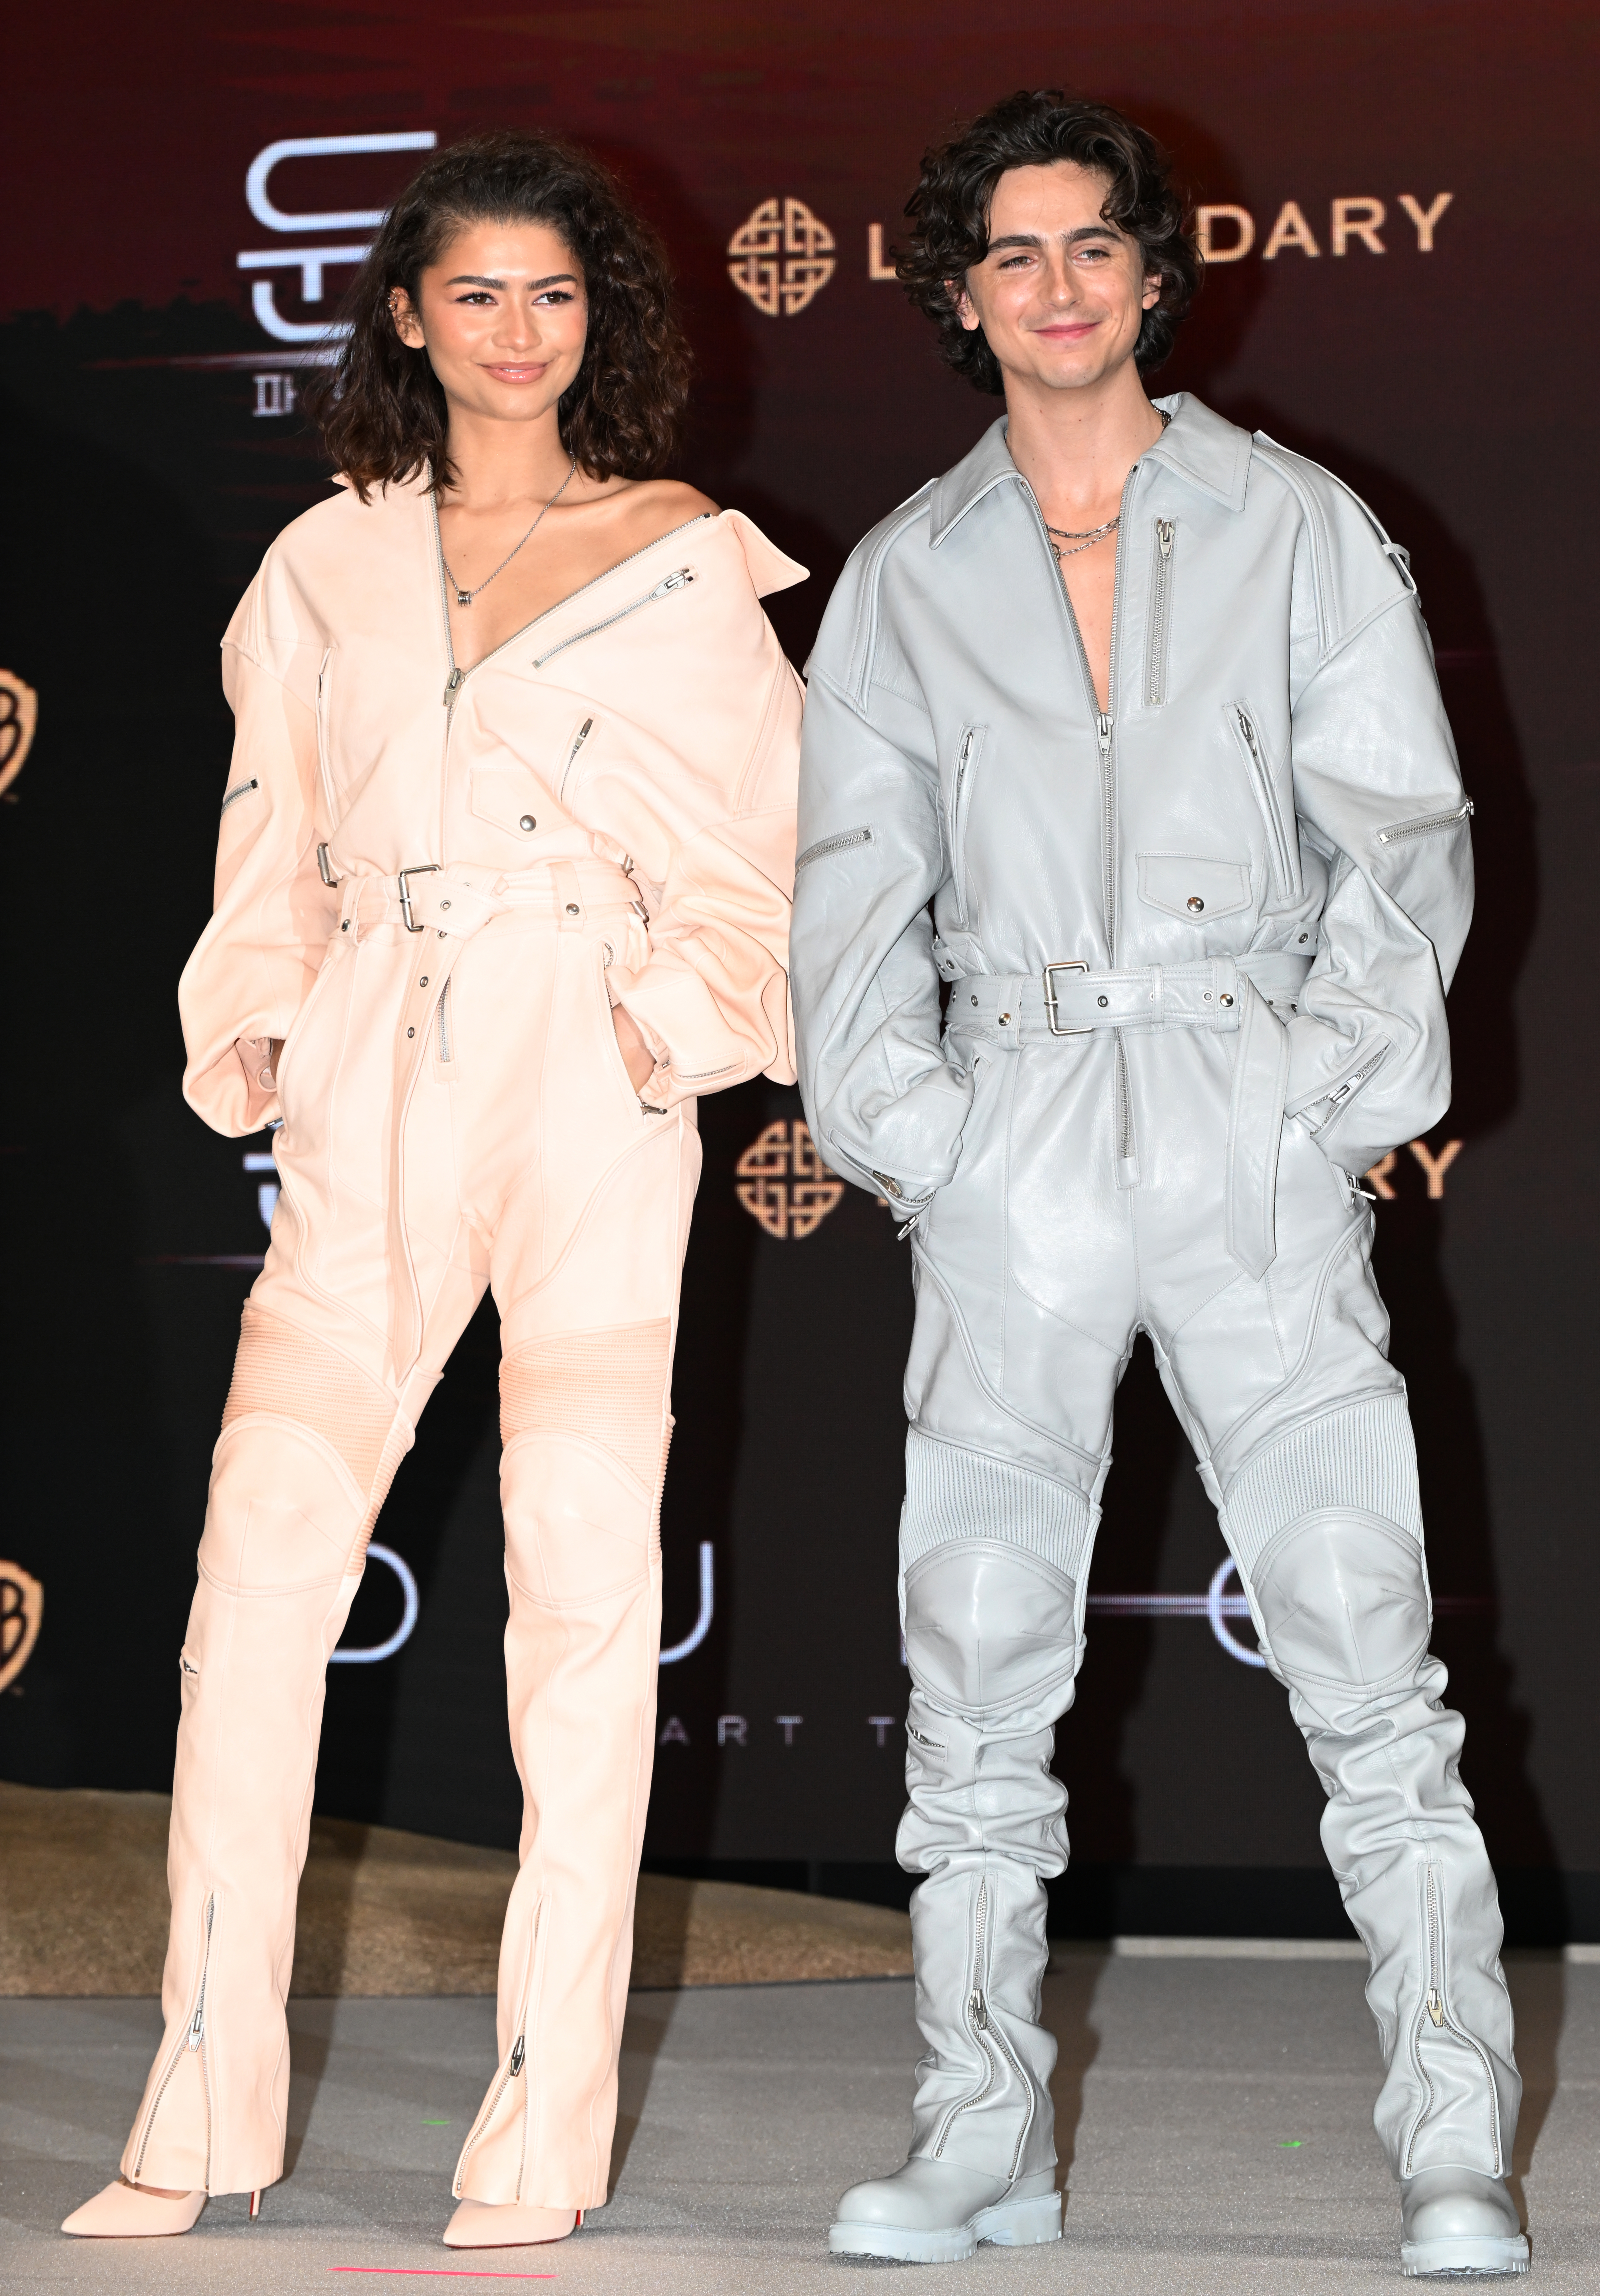 The costars posing in their matching pastel jumpsuits